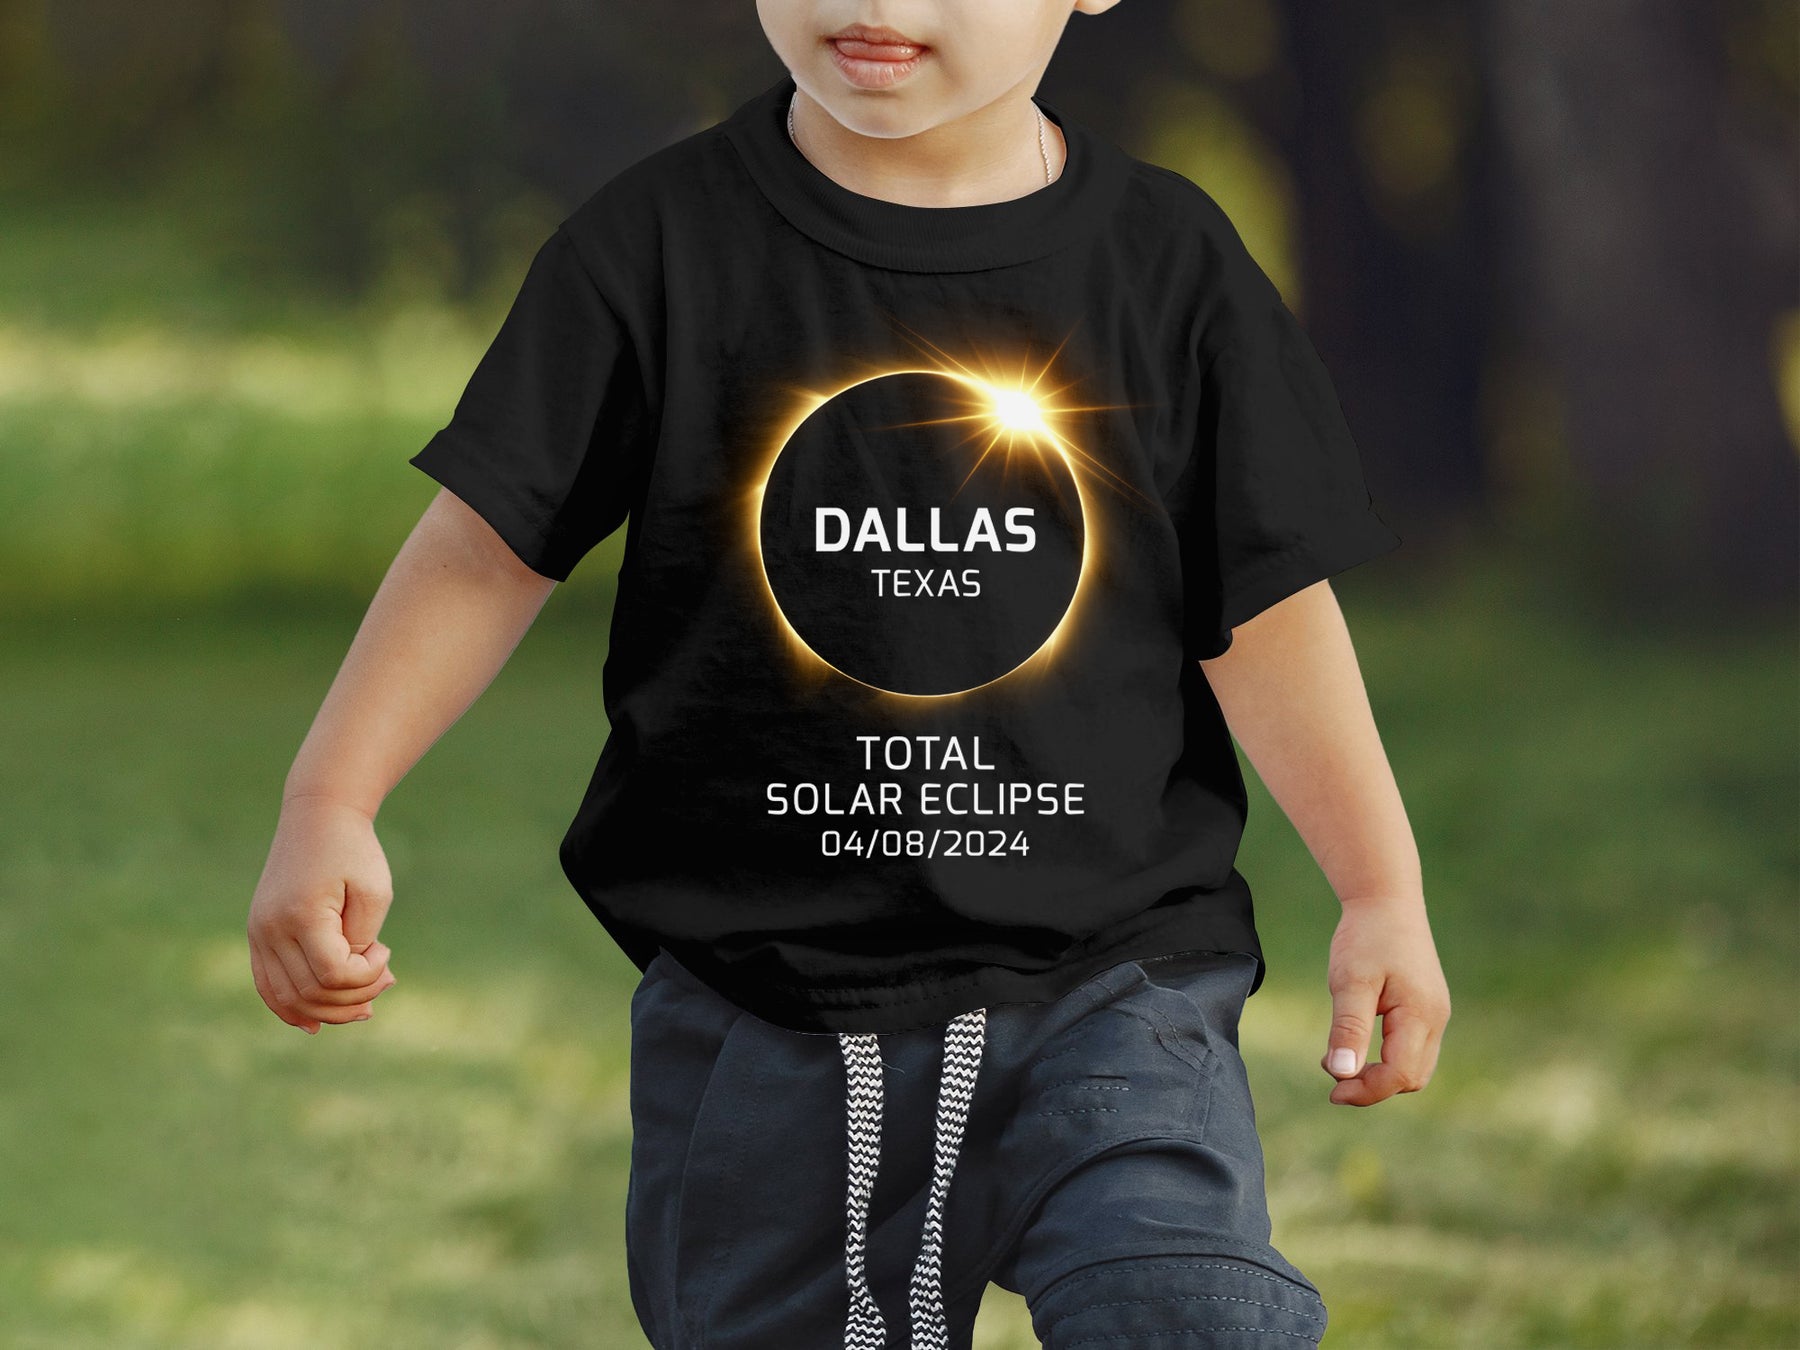 2024 Total Solar Eclipse Custom Shirt - Personalized City and State - USA Totality Event Tee